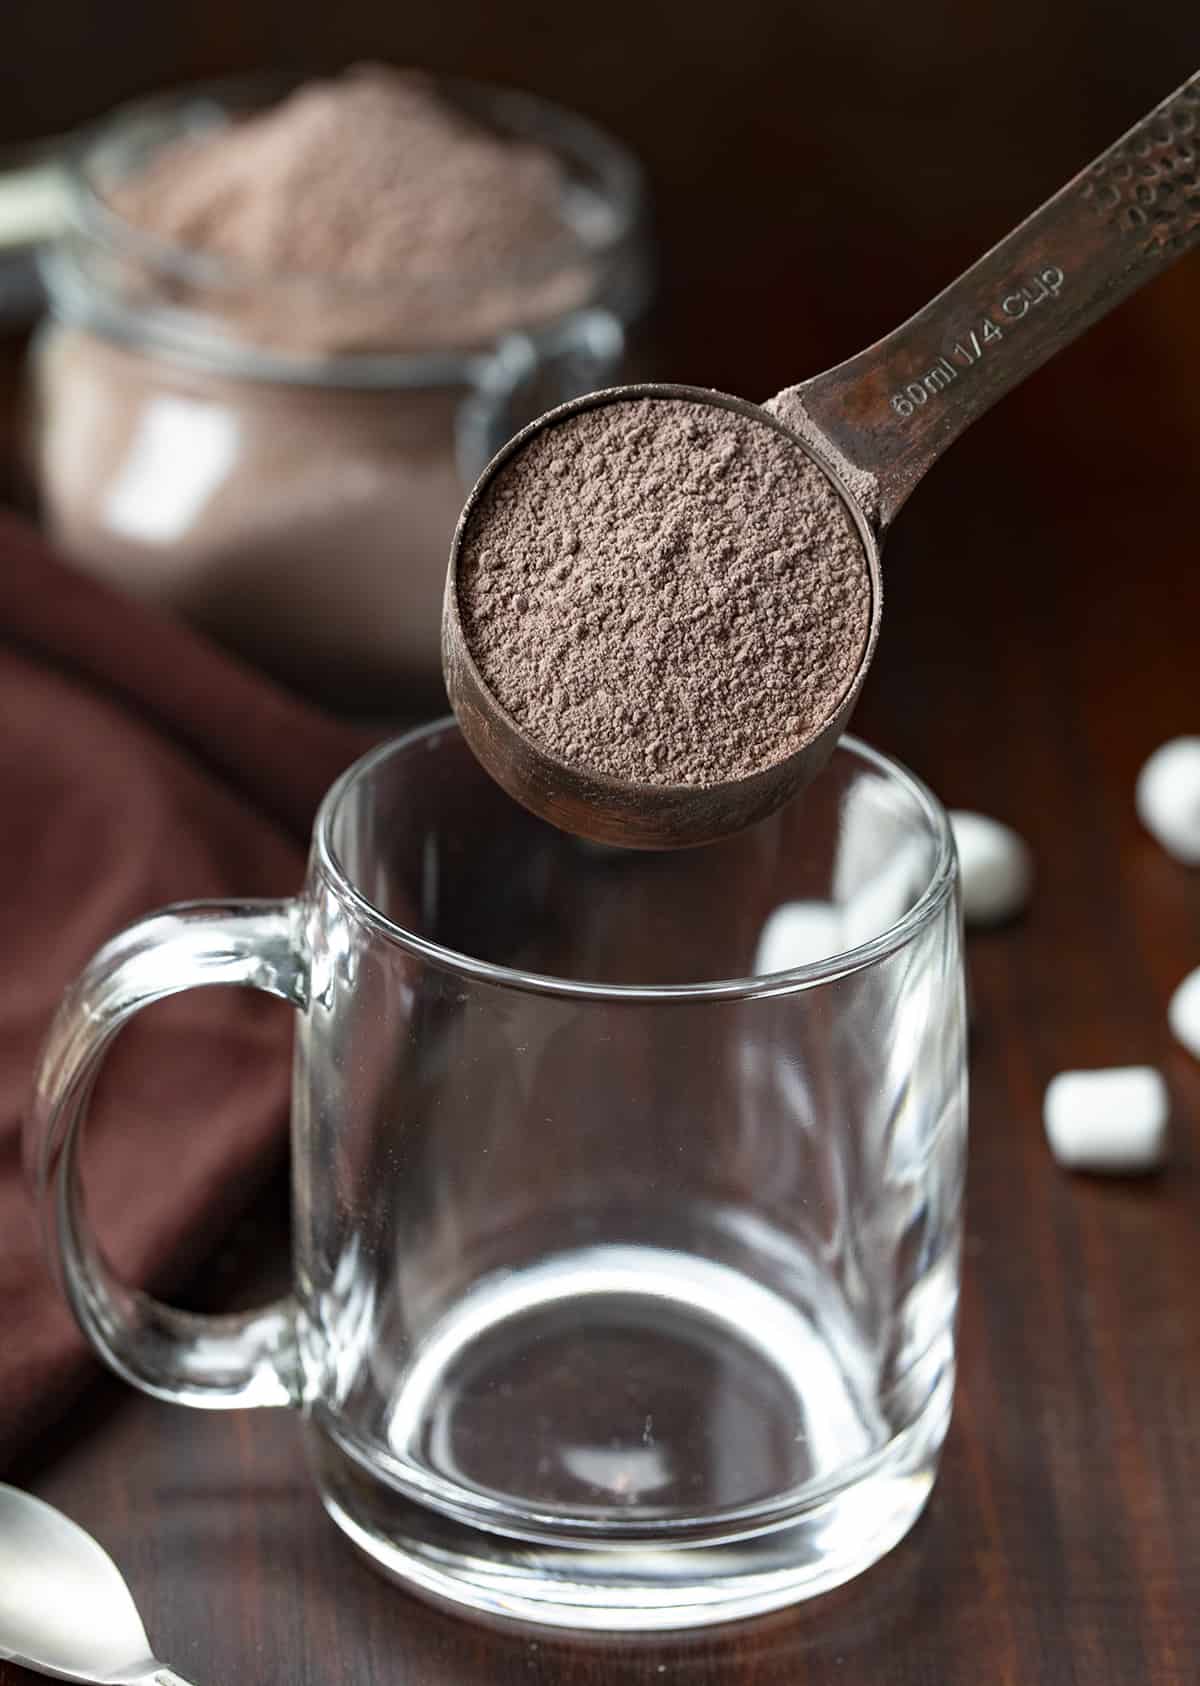 A 1/4 cup measuring scoop adding hot cocoa mix to an empty glass.